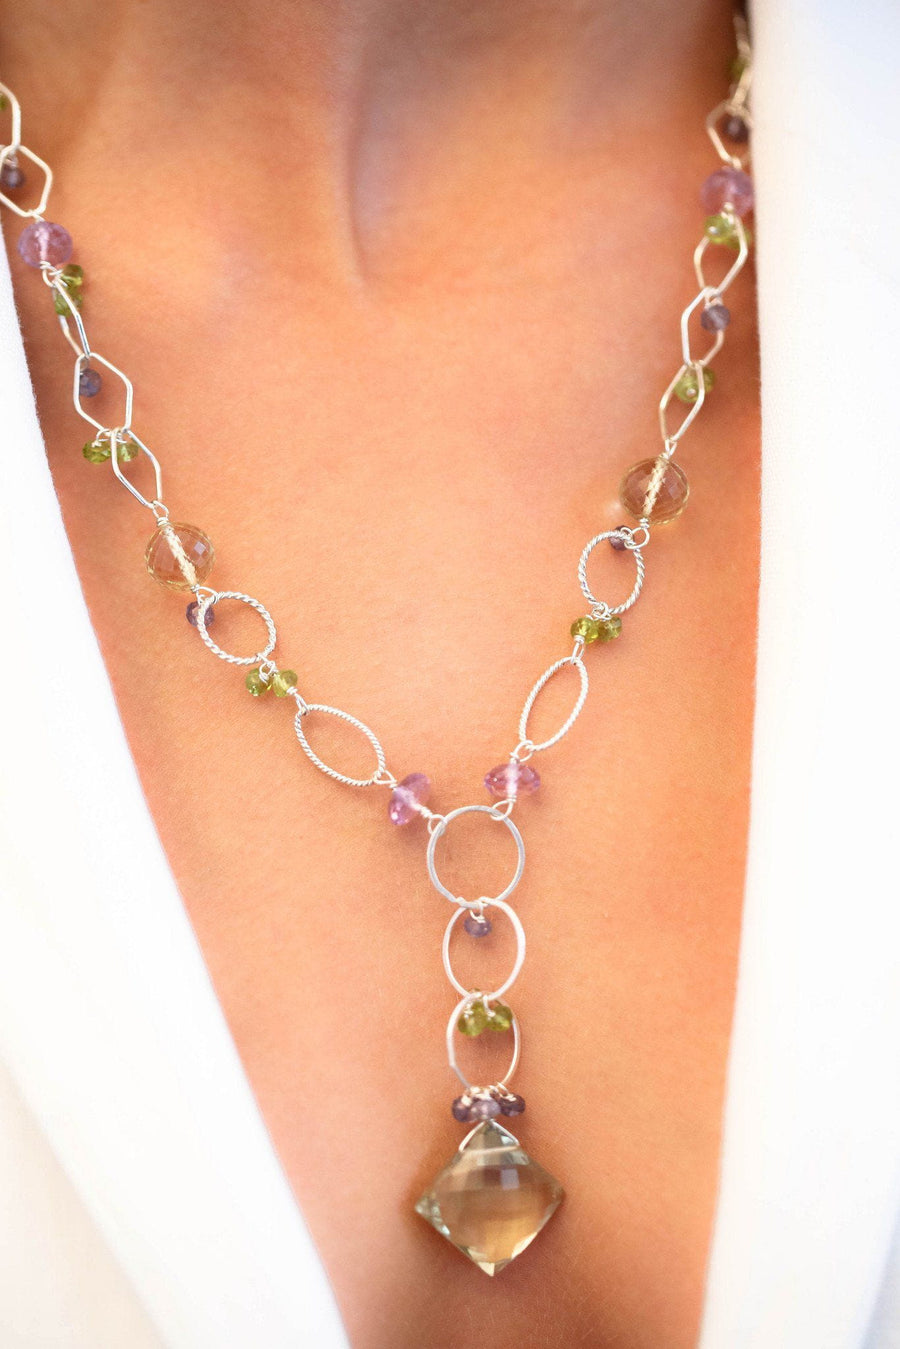 Chainy Green Amethyst Silver Necklace - Inaya Jewelry